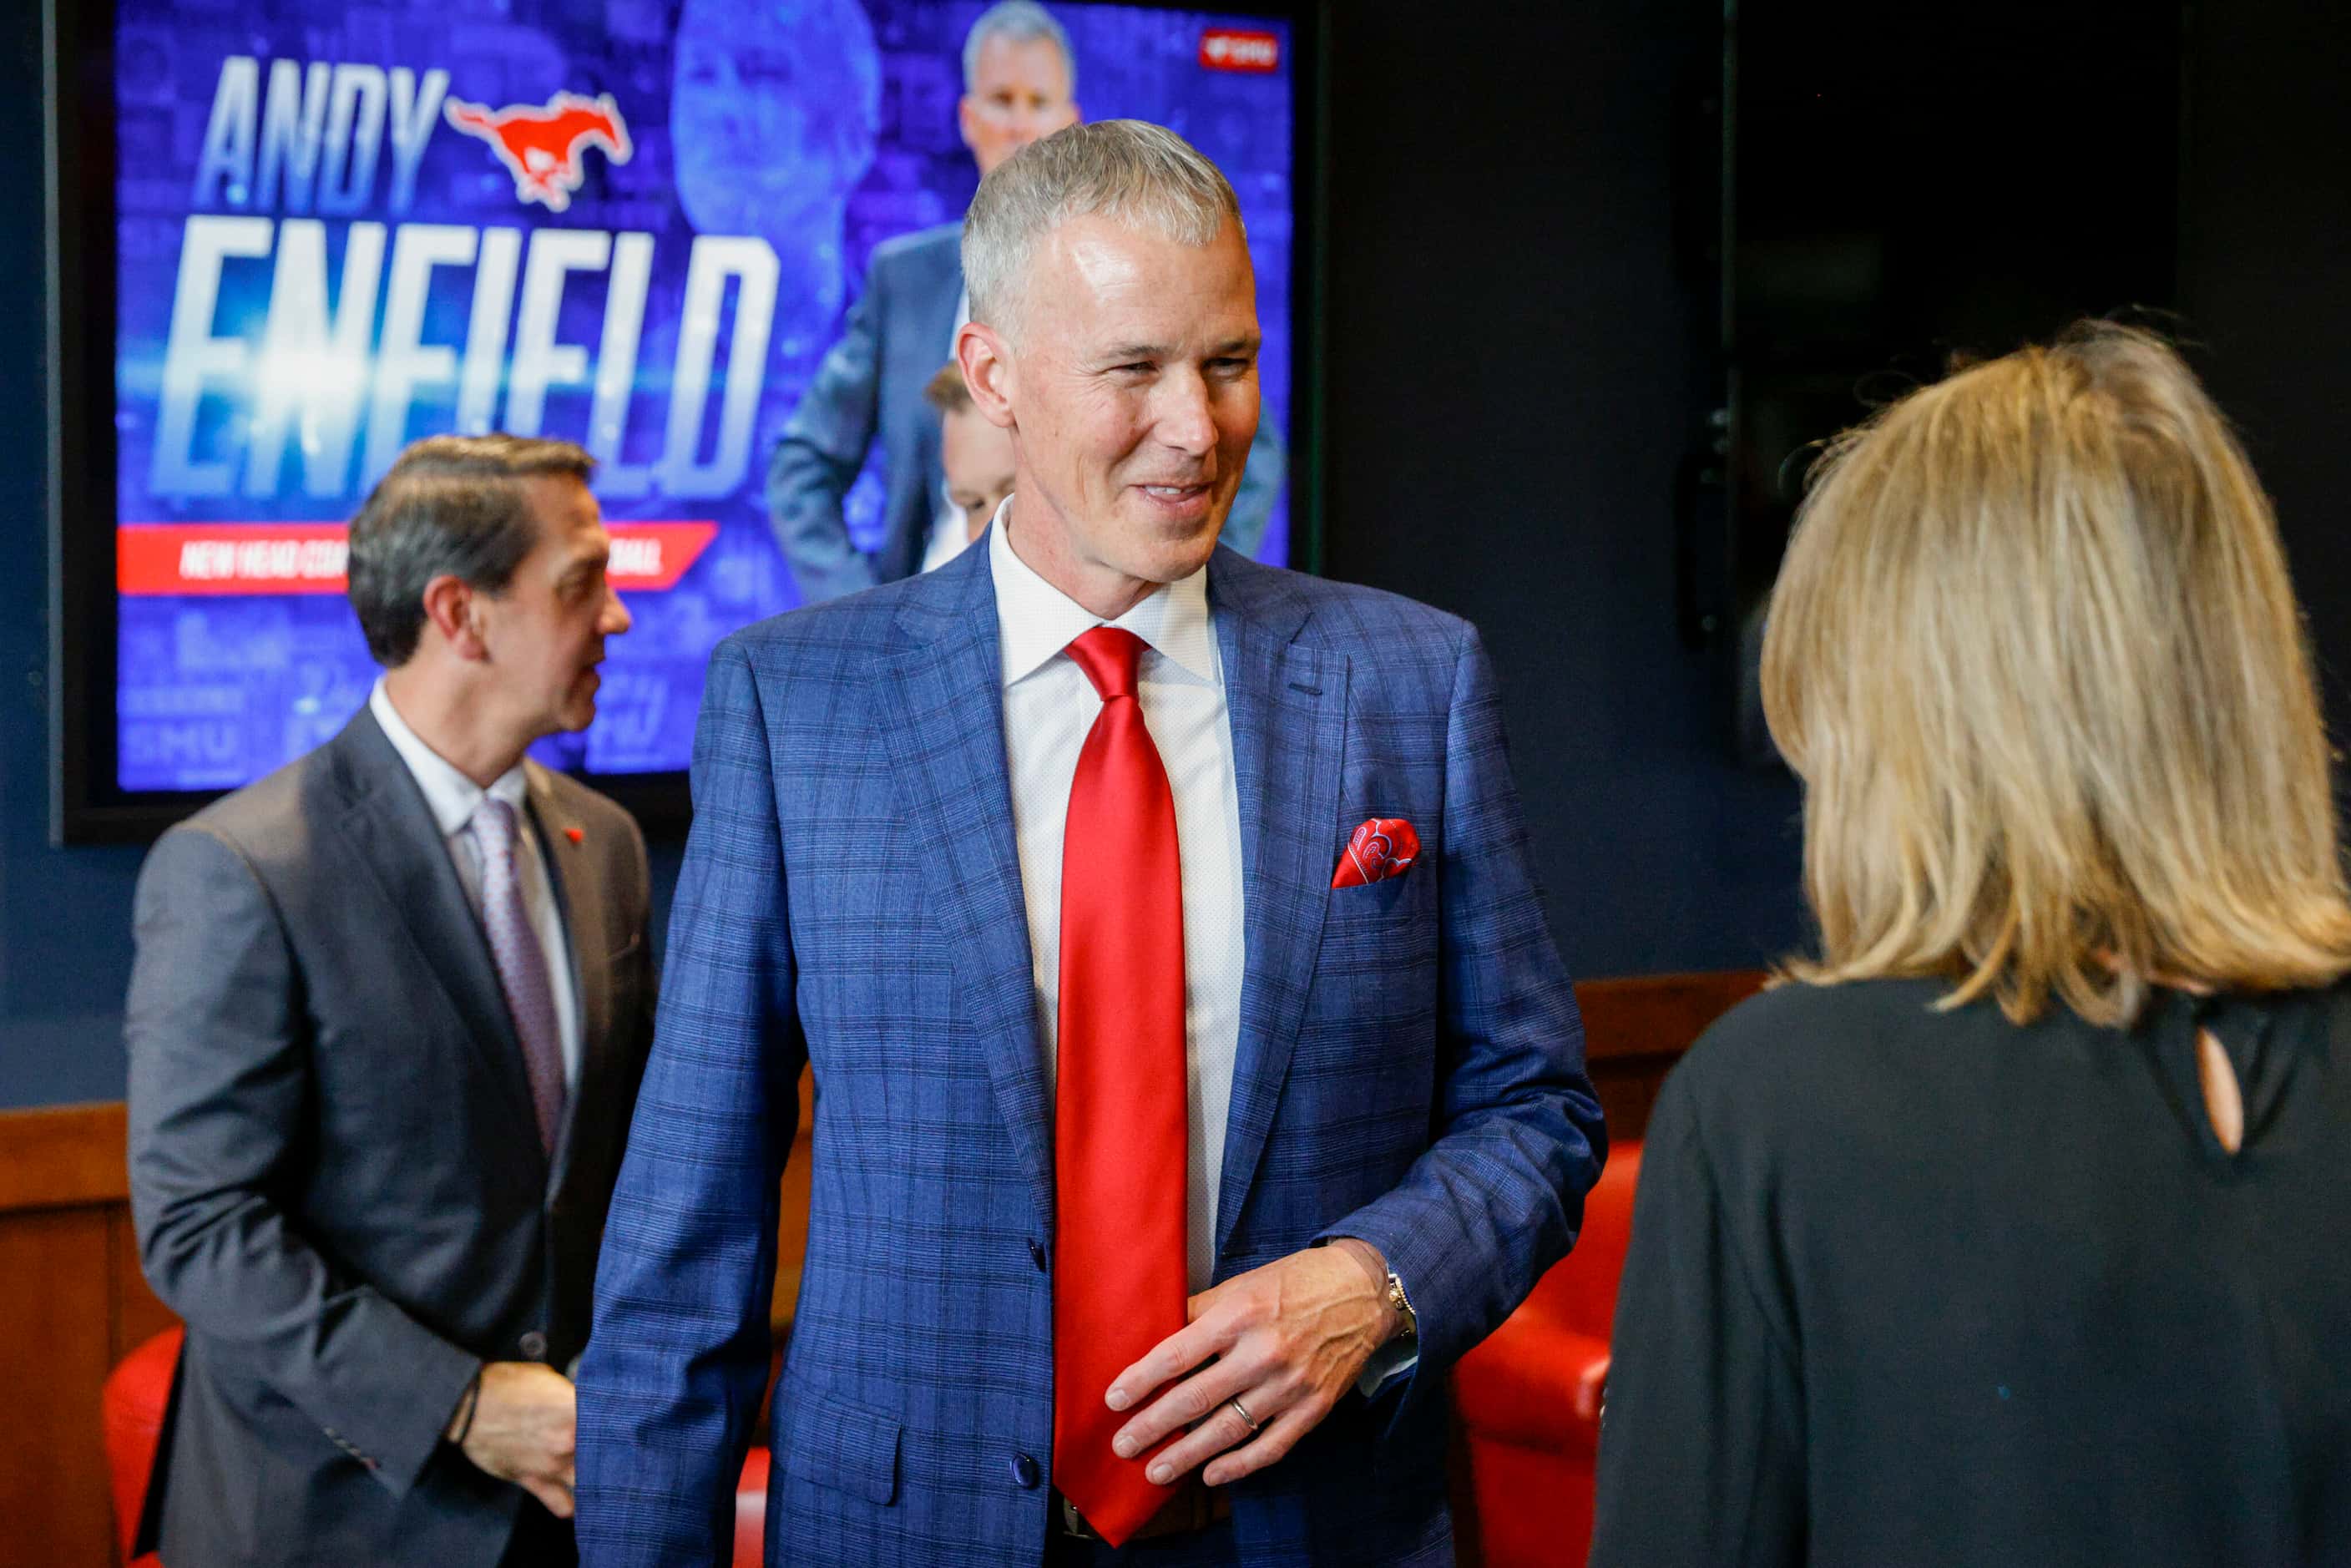 SMU head men's basketball coach Andy Enfield talks with an attendee after an introductory...